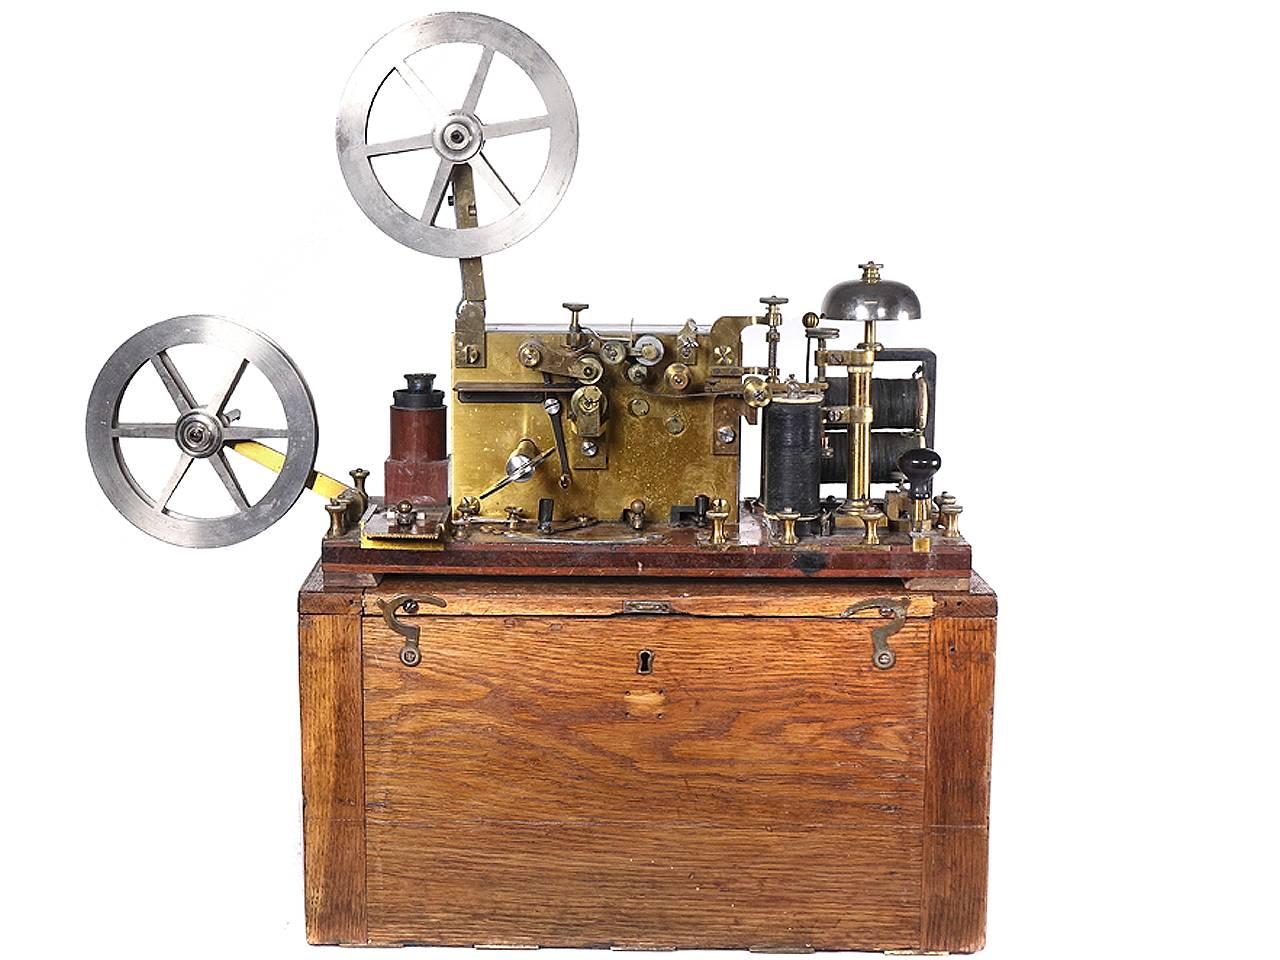 This complete and complex field telegraph is attributed to L.M. Ericsson. All the equipment including the key, ribbon printer or recorder, bell sounder, tools plus a number of other items fit neatly into a nicely made mahogany case. Note the